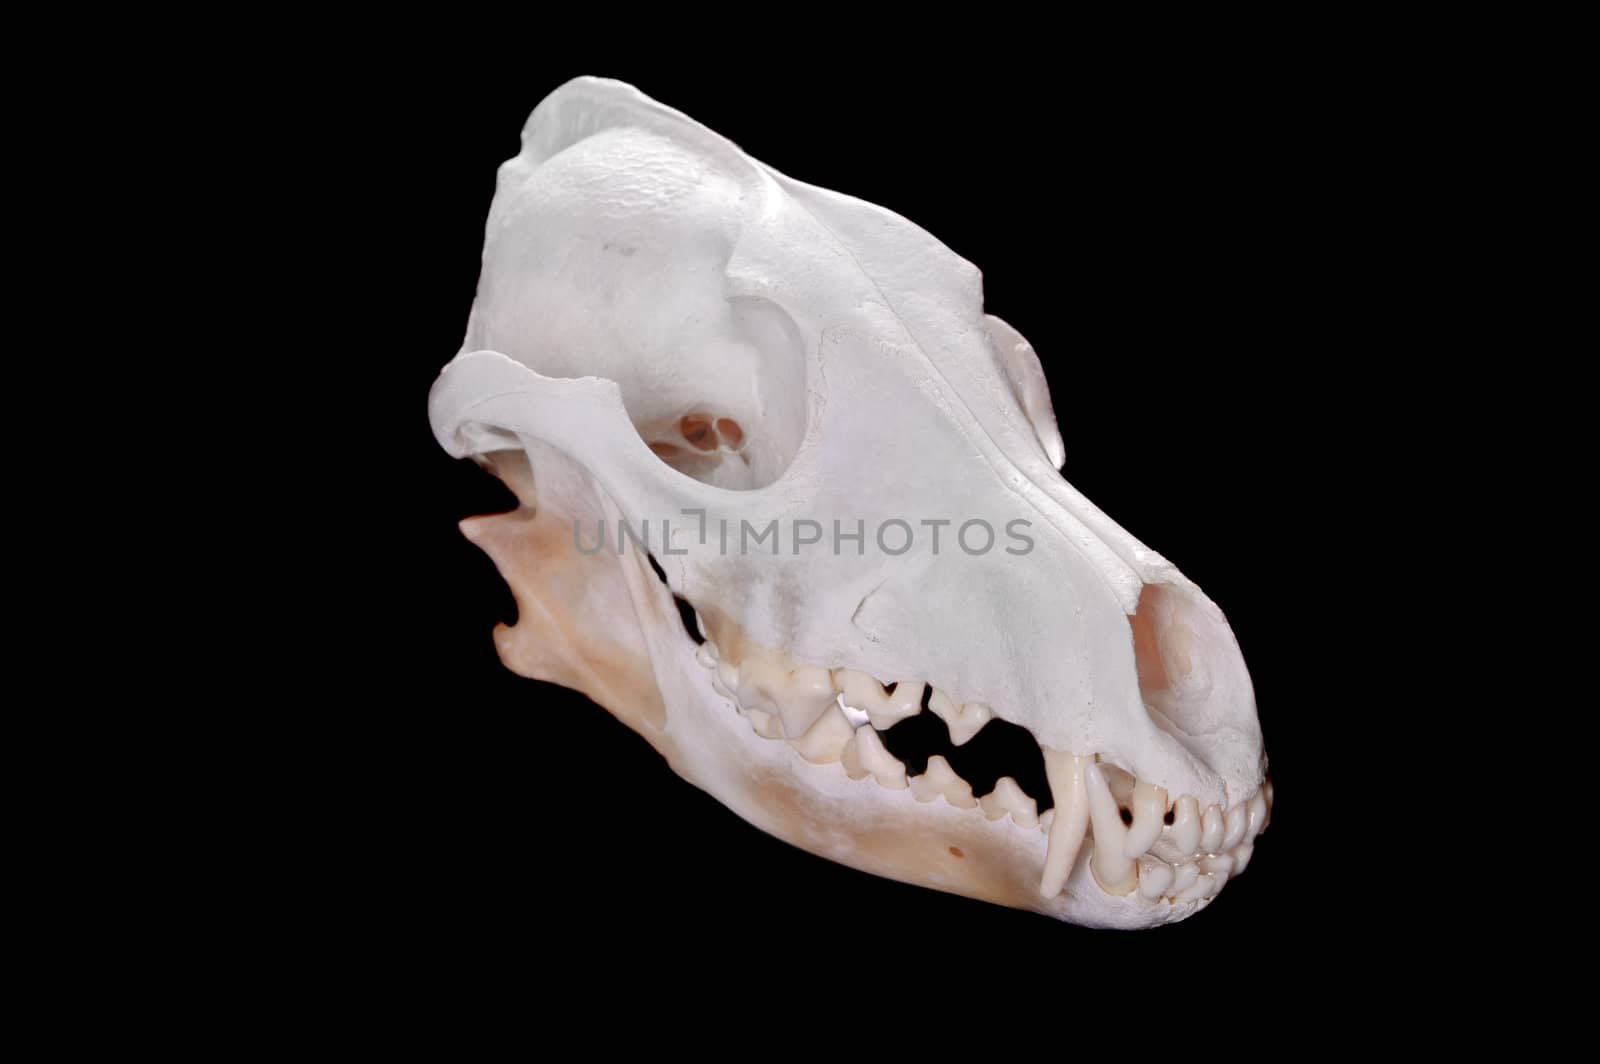 Skull of a coyote (canis Latrans) on a black background